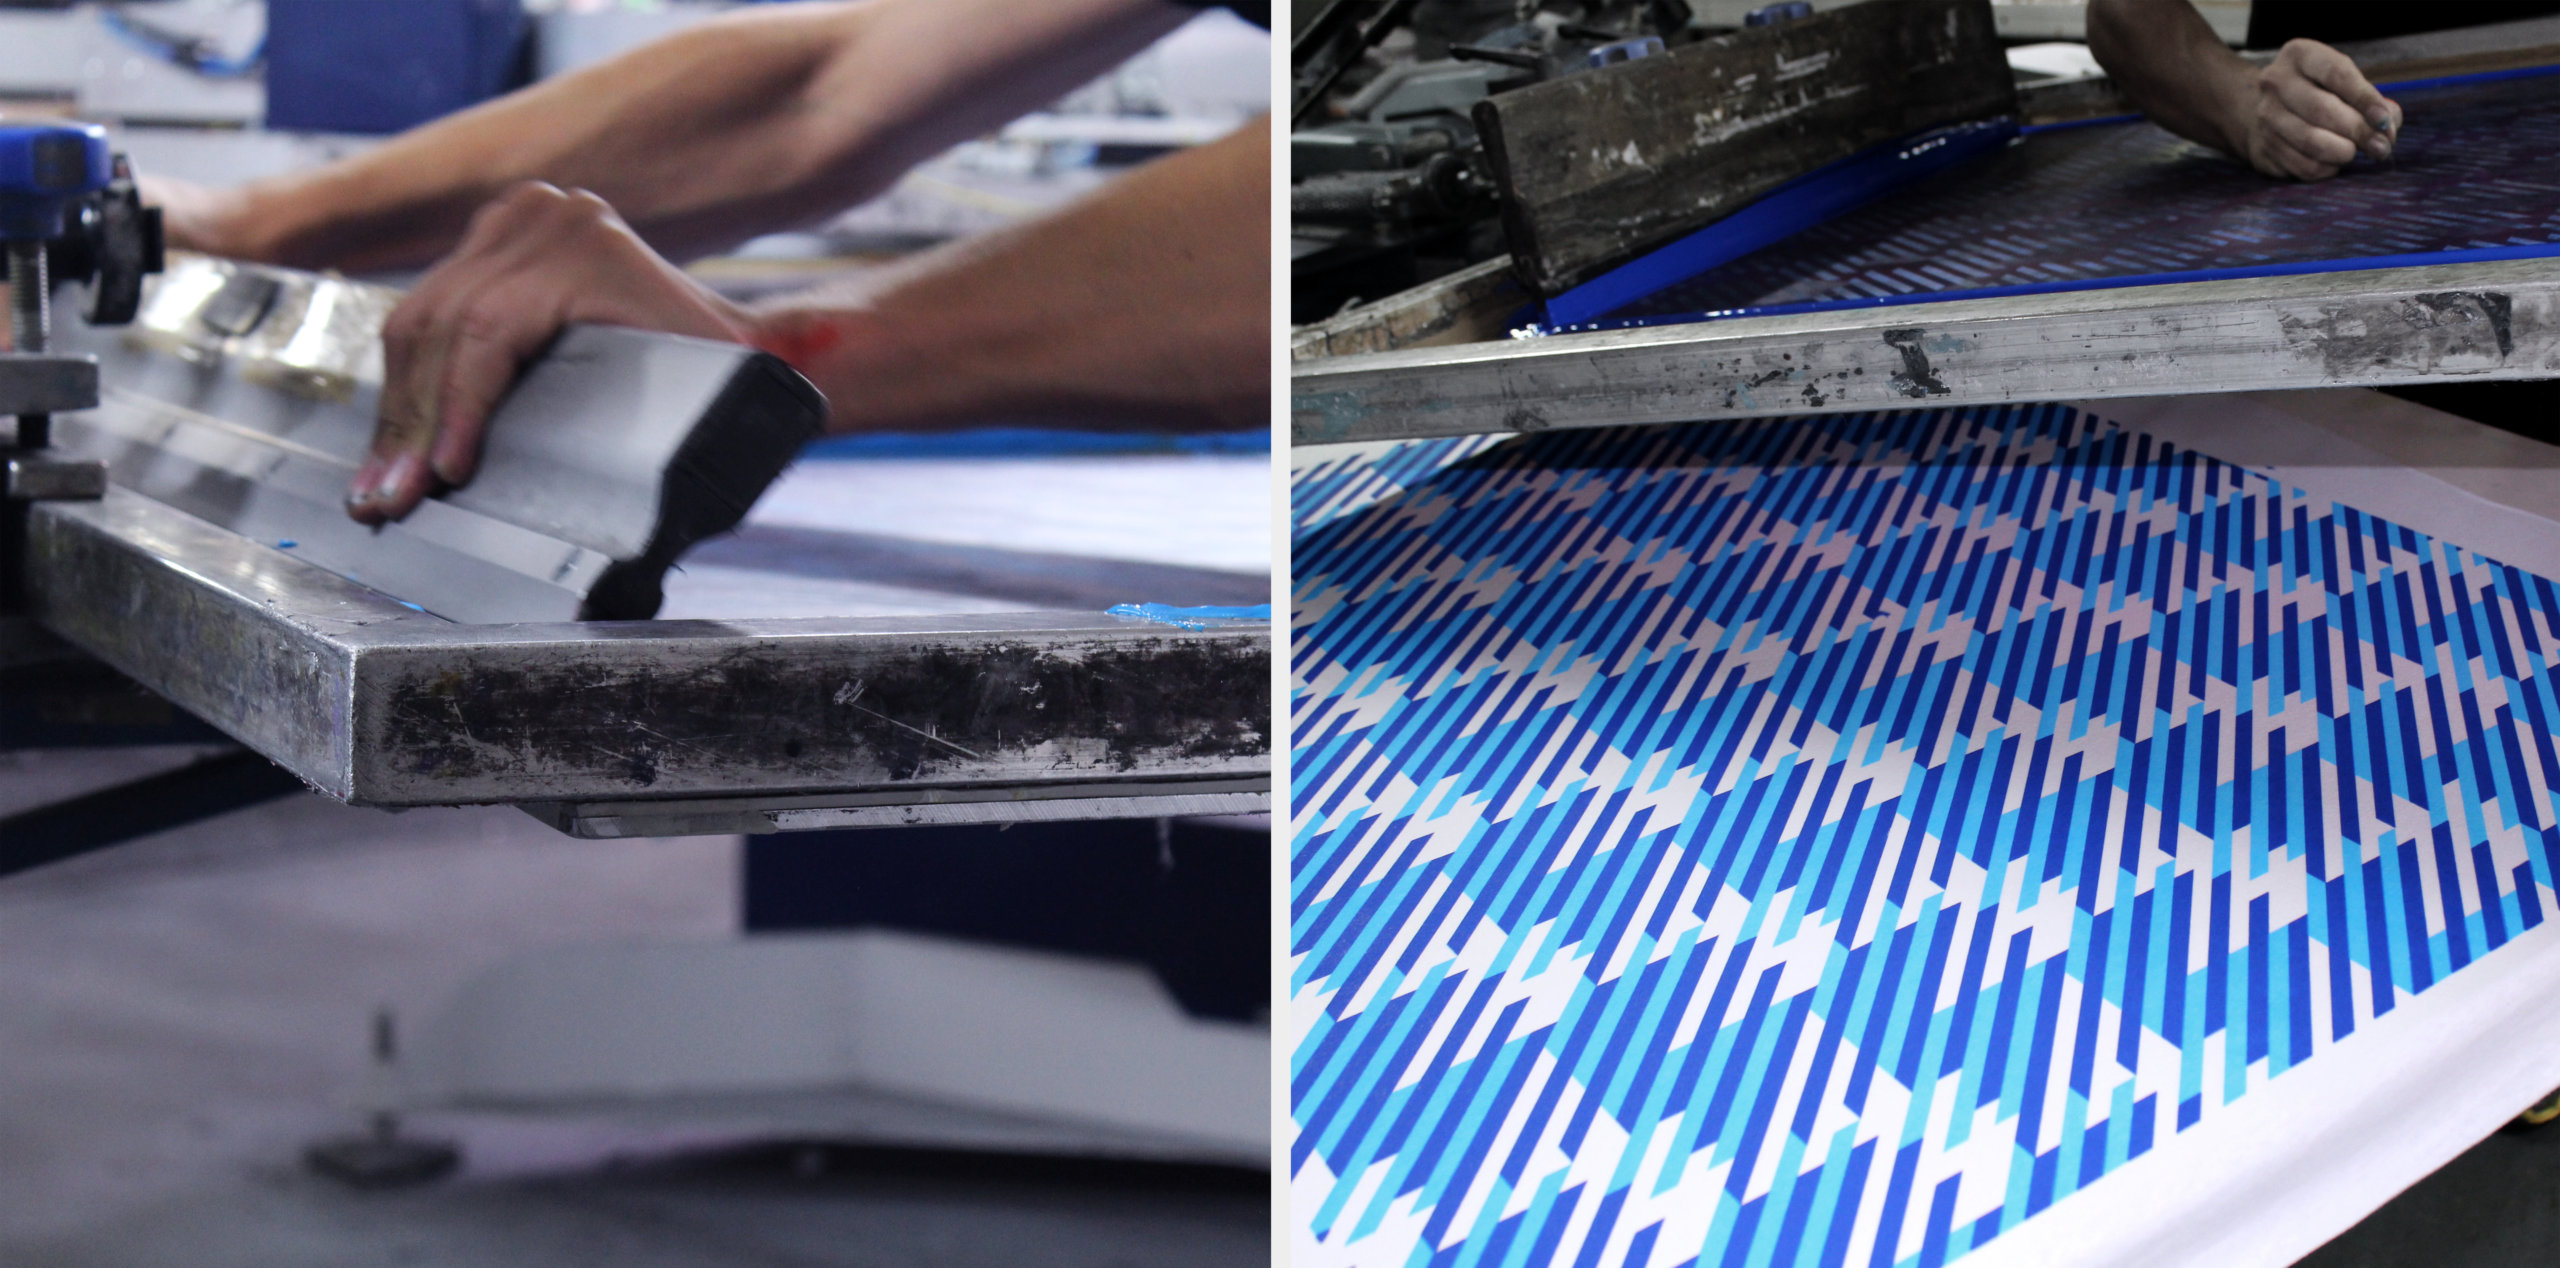 Two photos of fabric panels being screen printed from different angles.